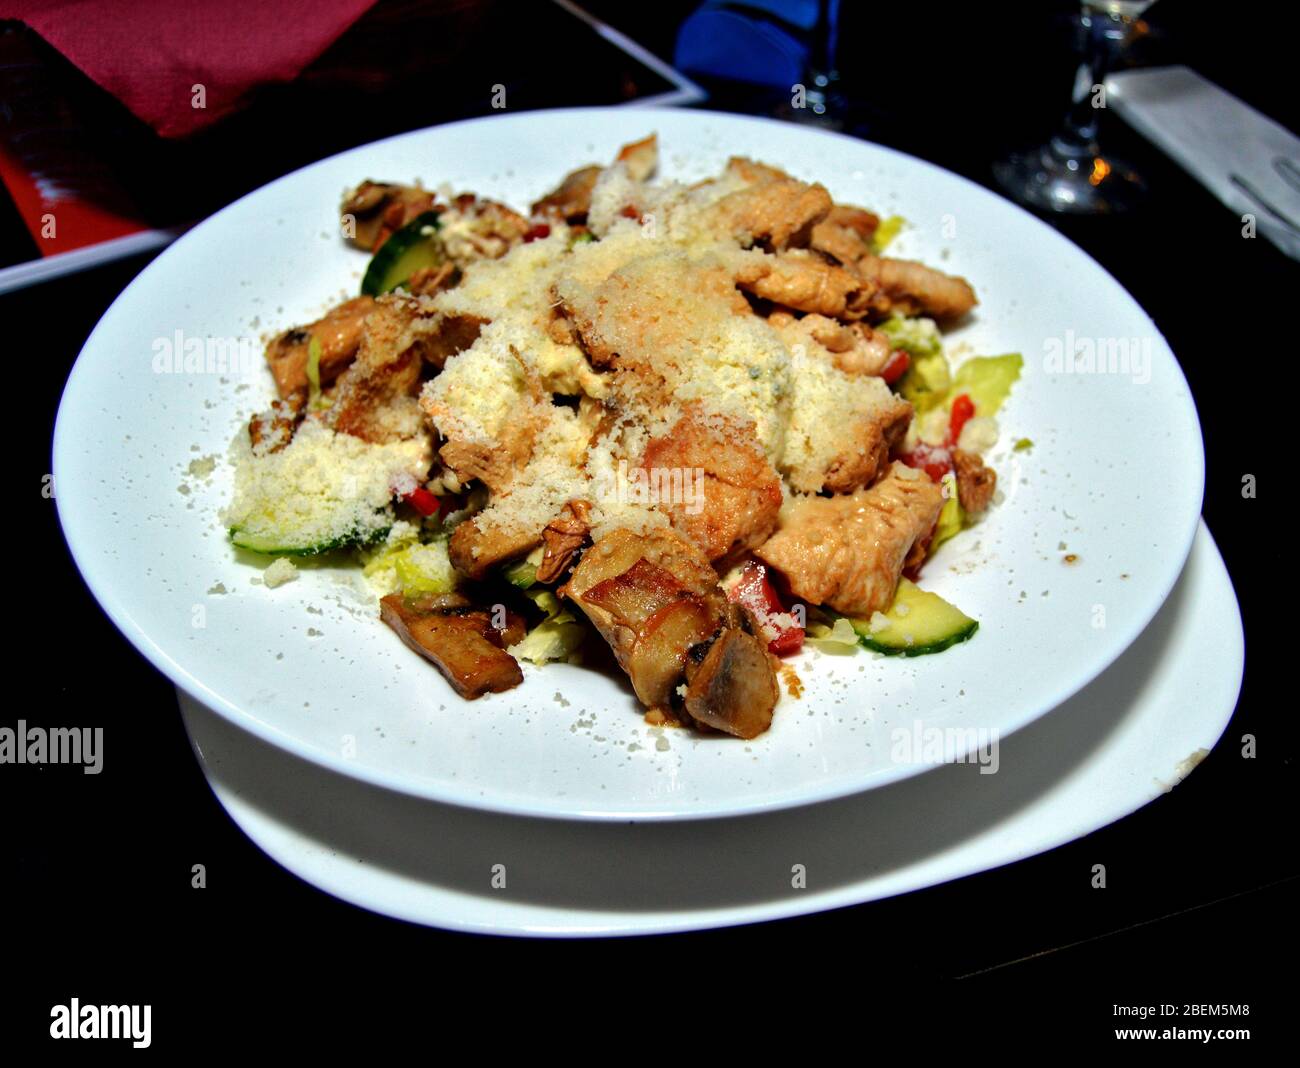 Serving of healthy salad with vegetables, chicken bits and sprinkled with parmesan cheese, a delicious dish great for diets made with organic ingredie Stock Photo